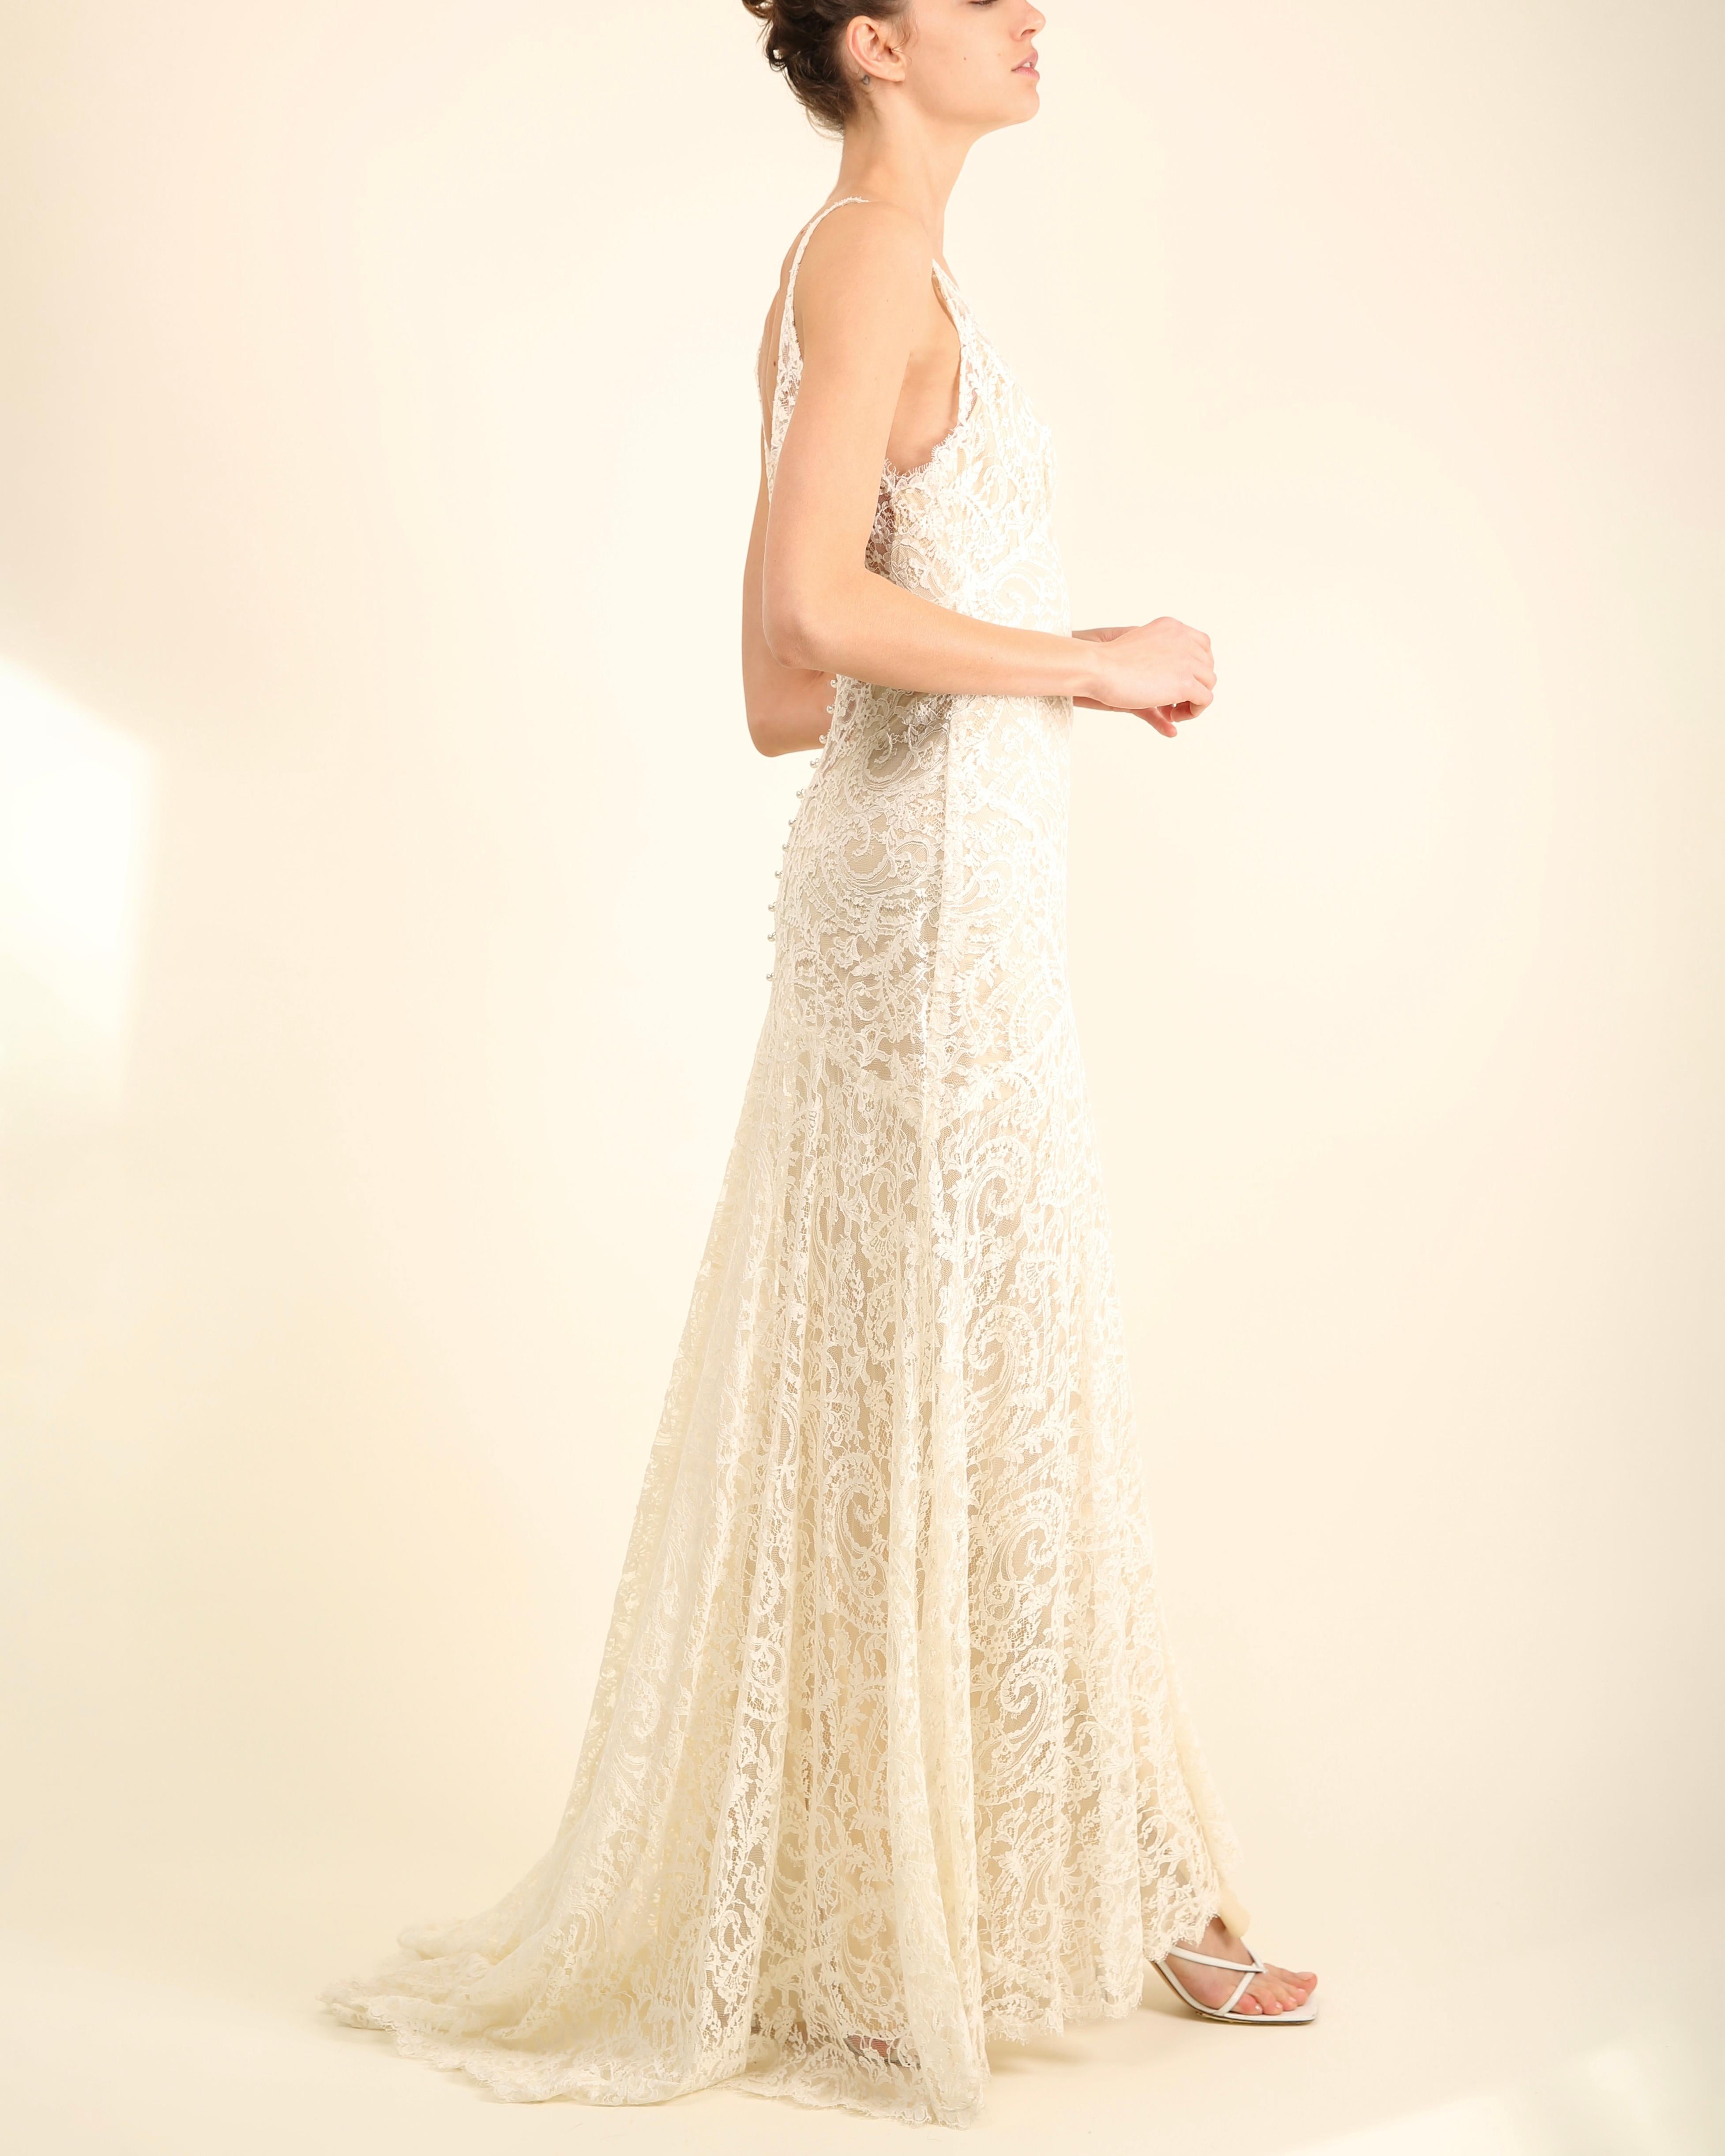 Monique Lhuillier ivory lace plunging backless wedding gown with train dress  10